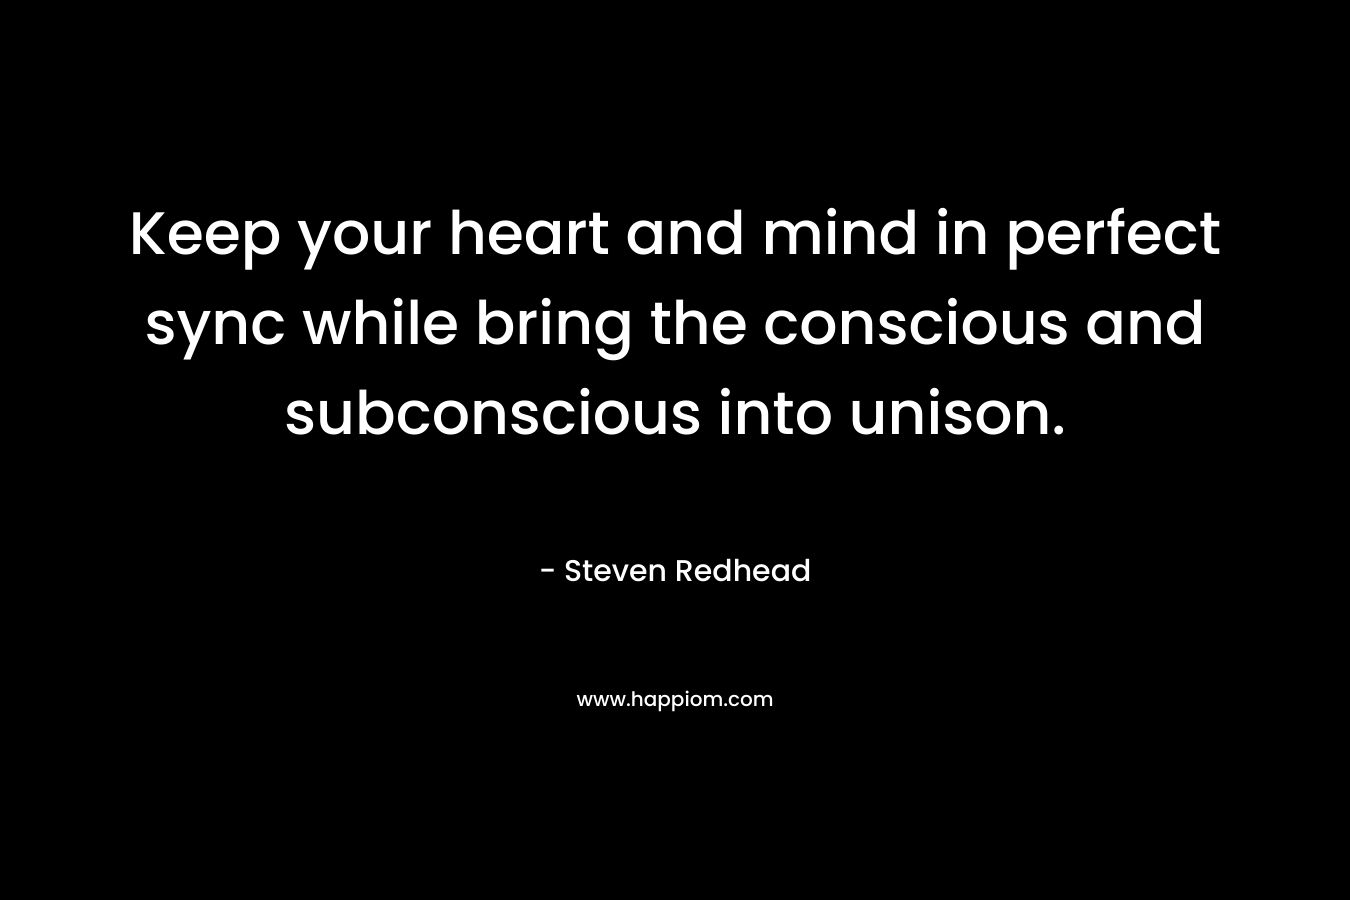 Keep your heart and mind in perfect sync while bring the conscious and subconscious into unison.